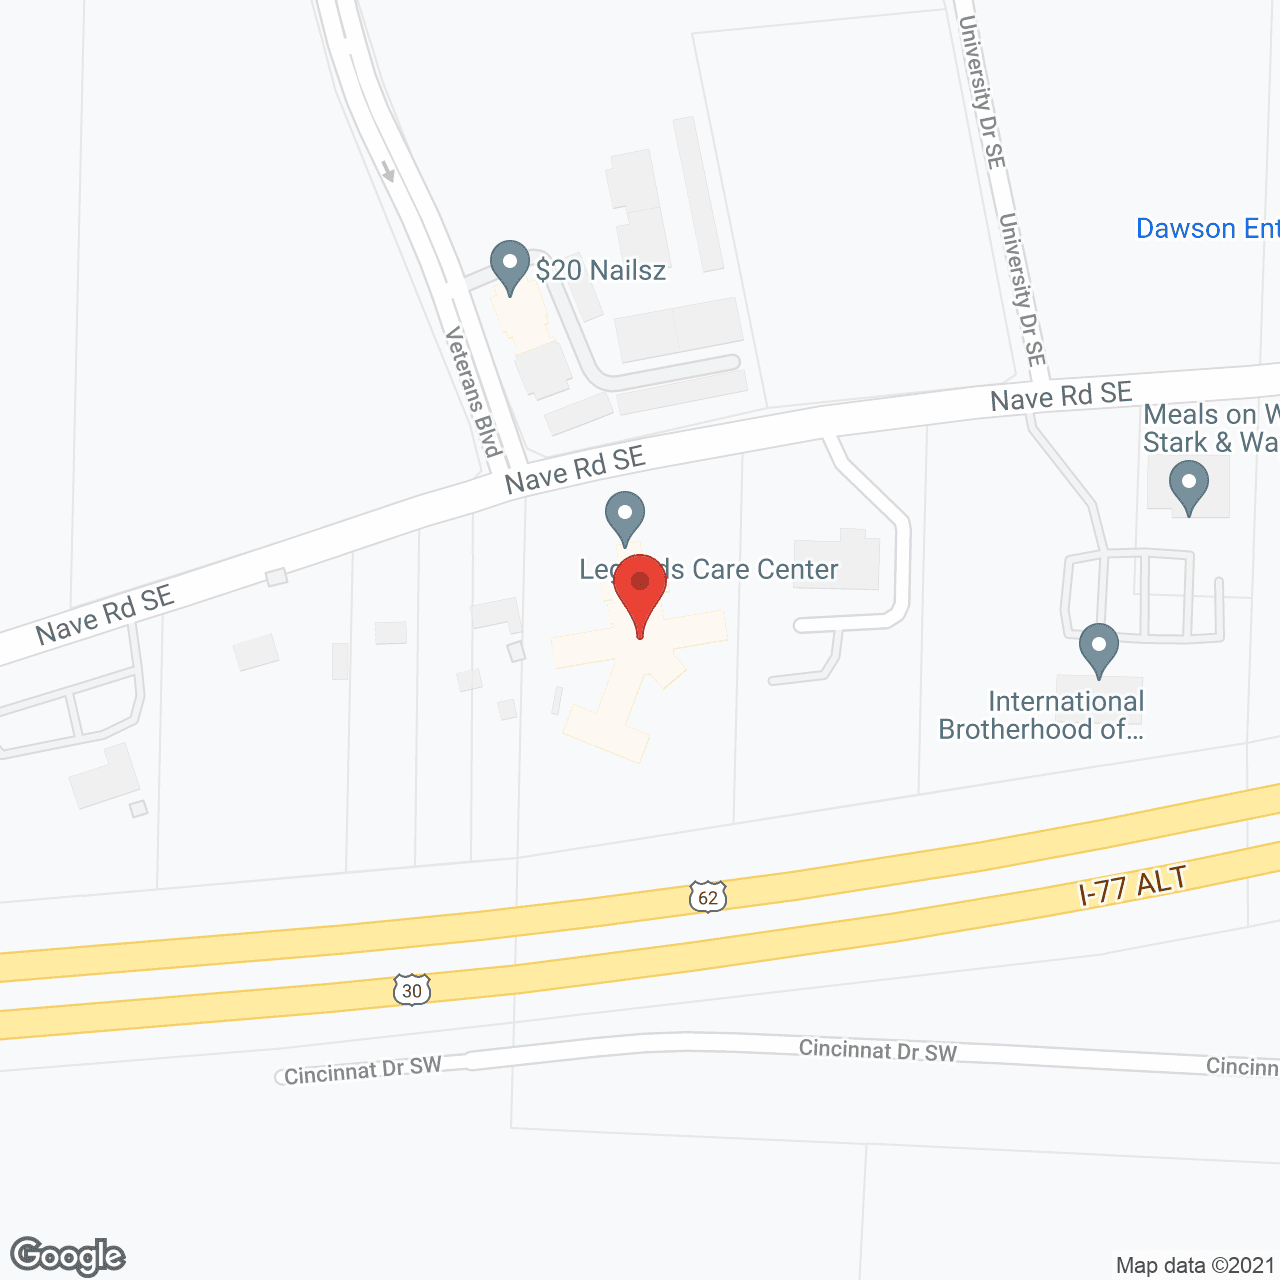 Legends Care Ctr in google map